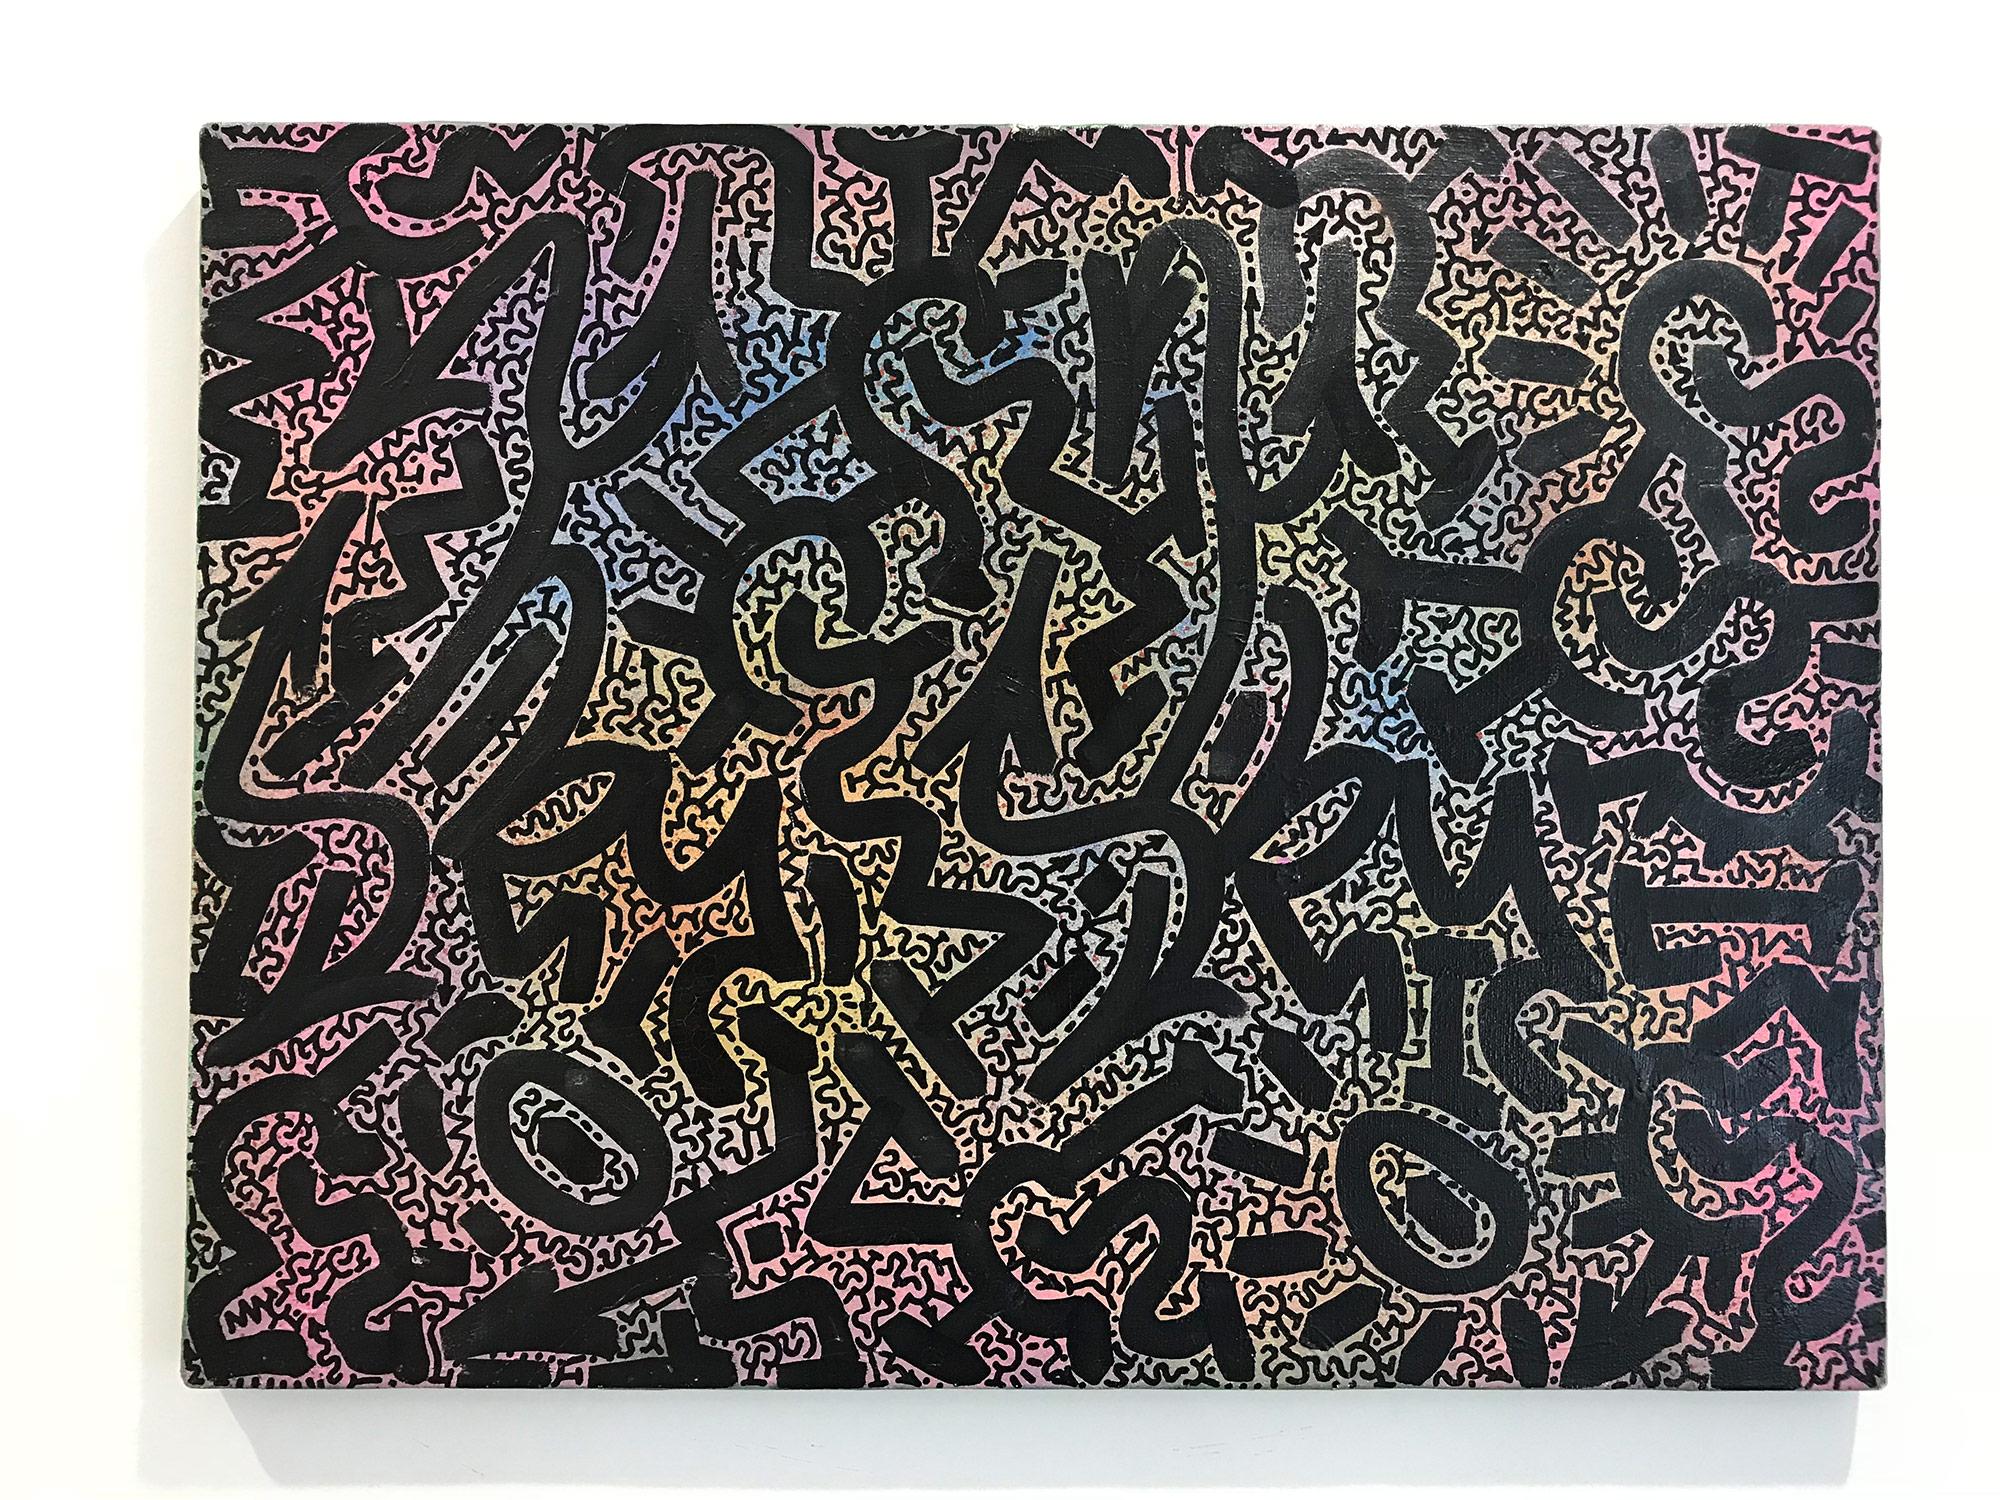 Tag on Prism of Colors, Partner of Keith Haring, Street Art 8